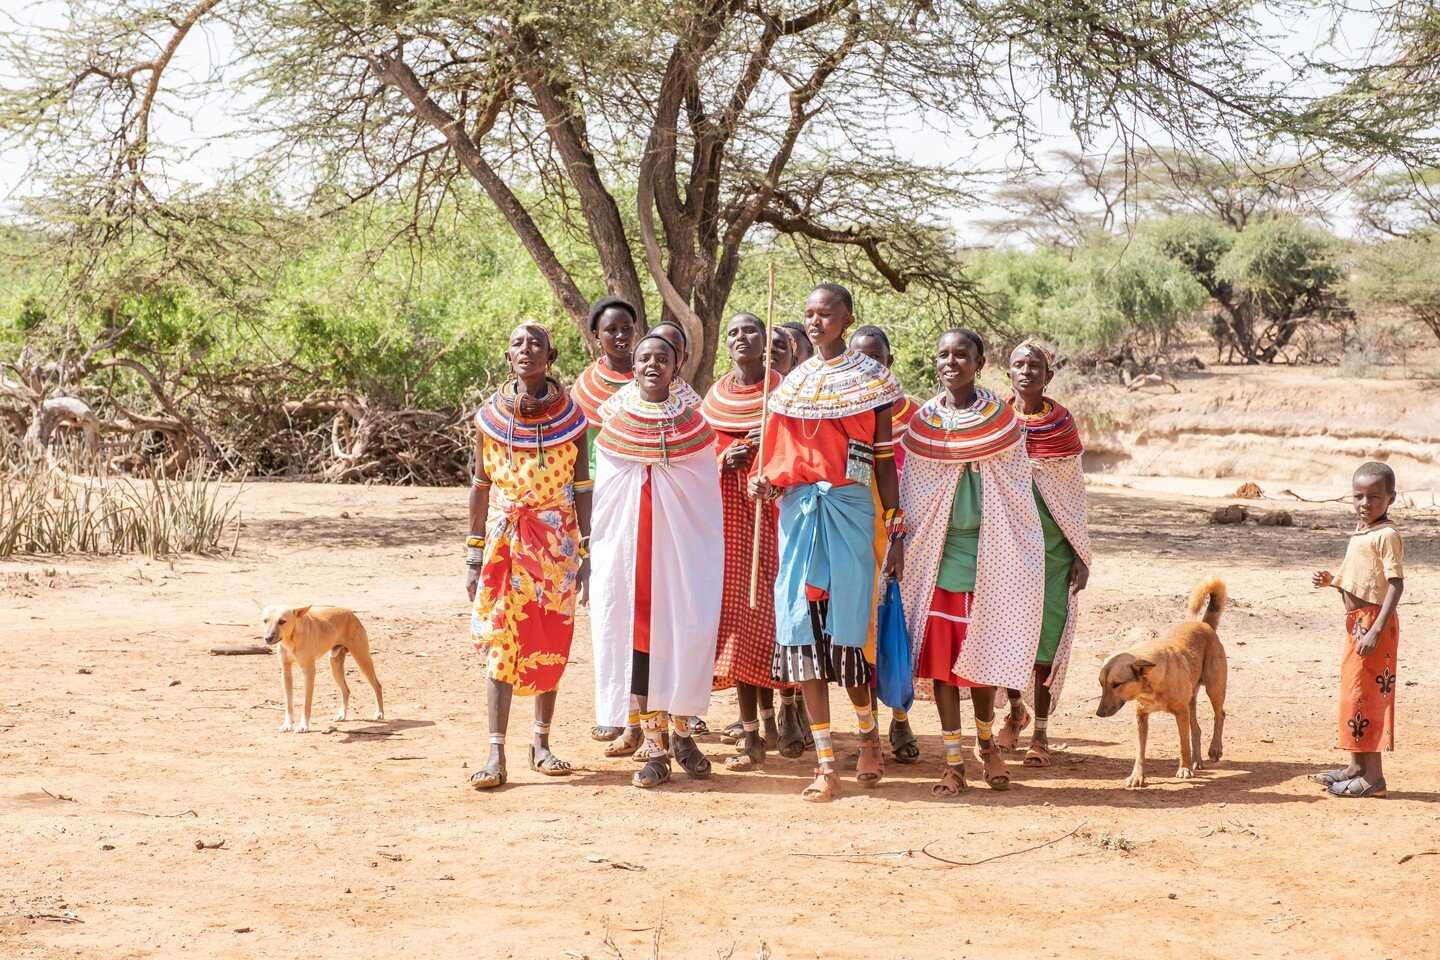 Clean water means more time, opportunity, and freedom. Providing a well in a Samburu community eliminates the long walk for water that many women face each day. With this newfound time, women in our partner communities now have the opportunity to exp